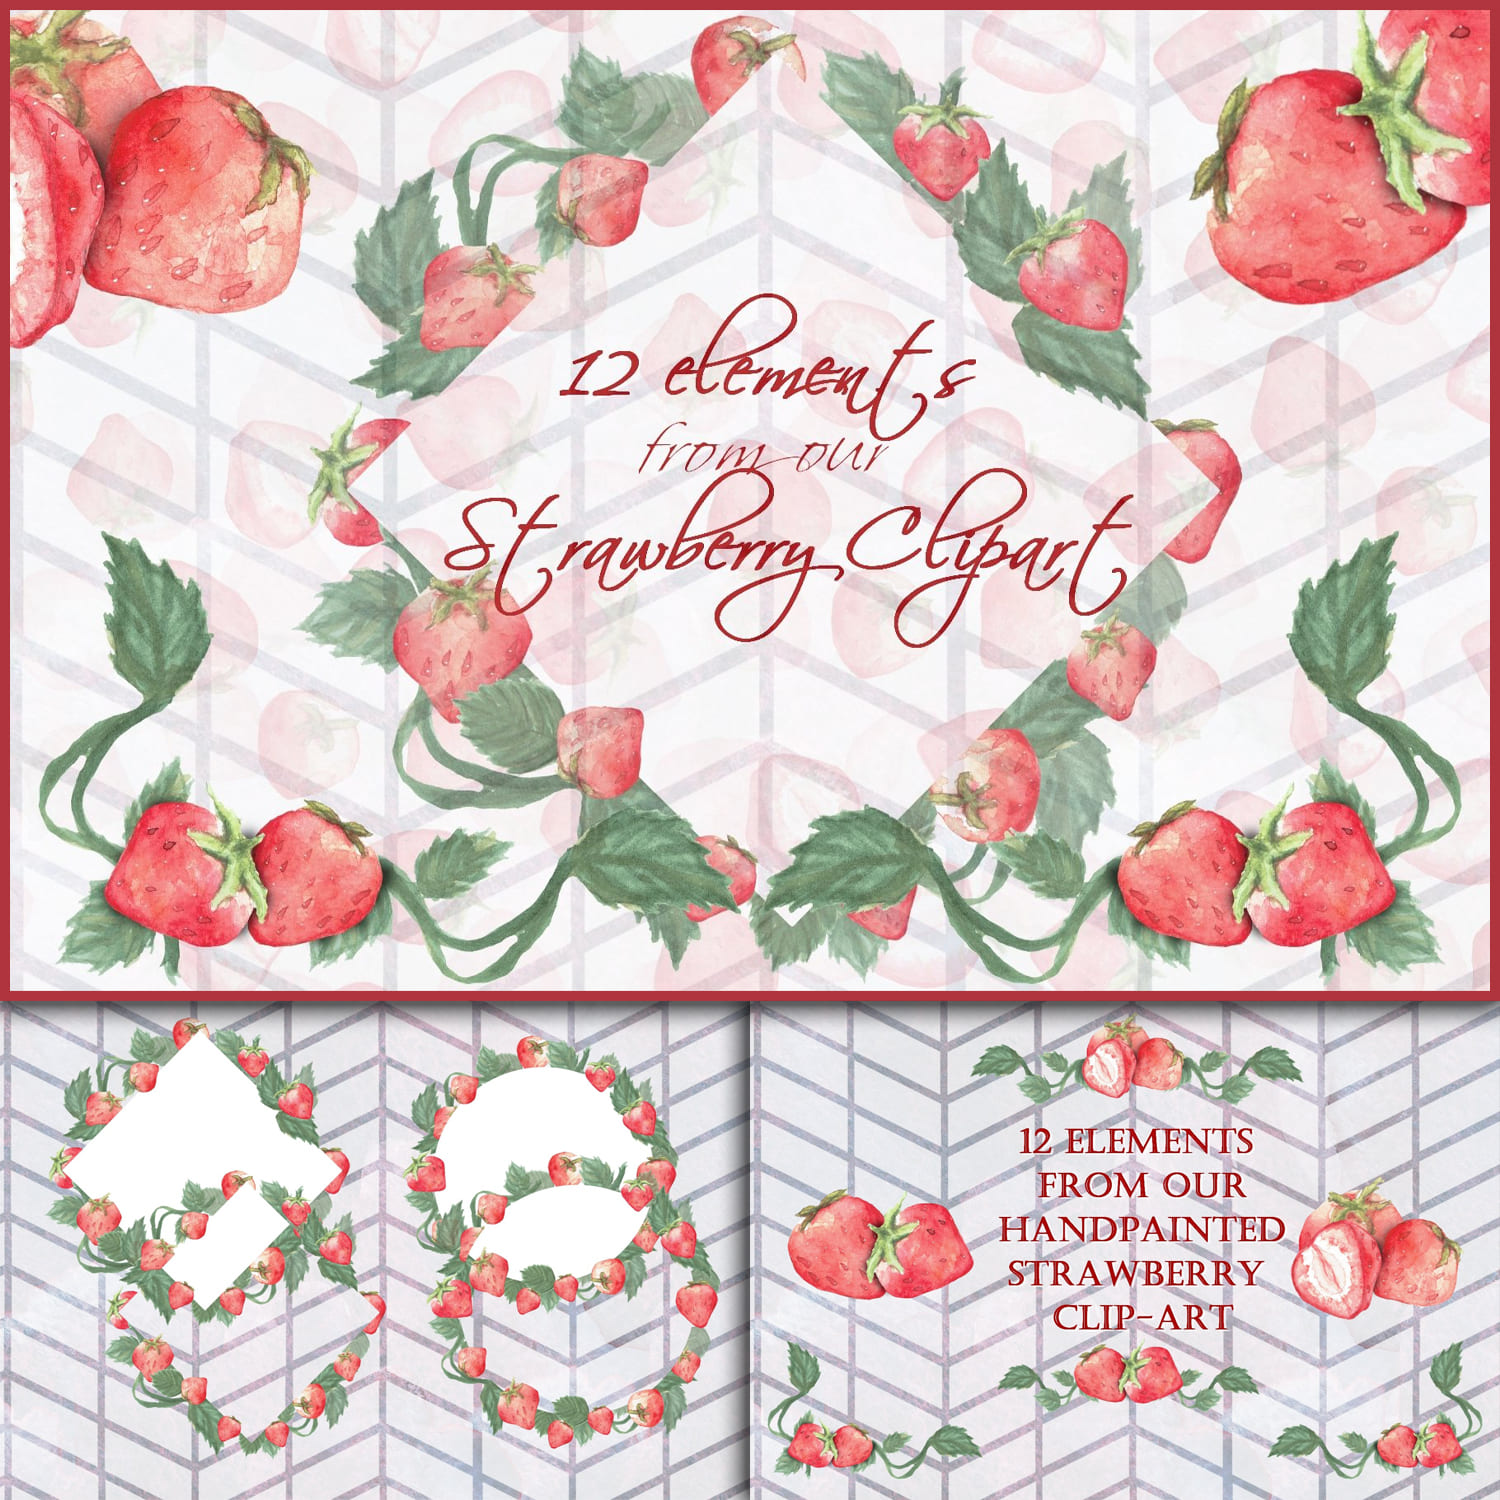 Strawberry Wreaths And More - main image preview.